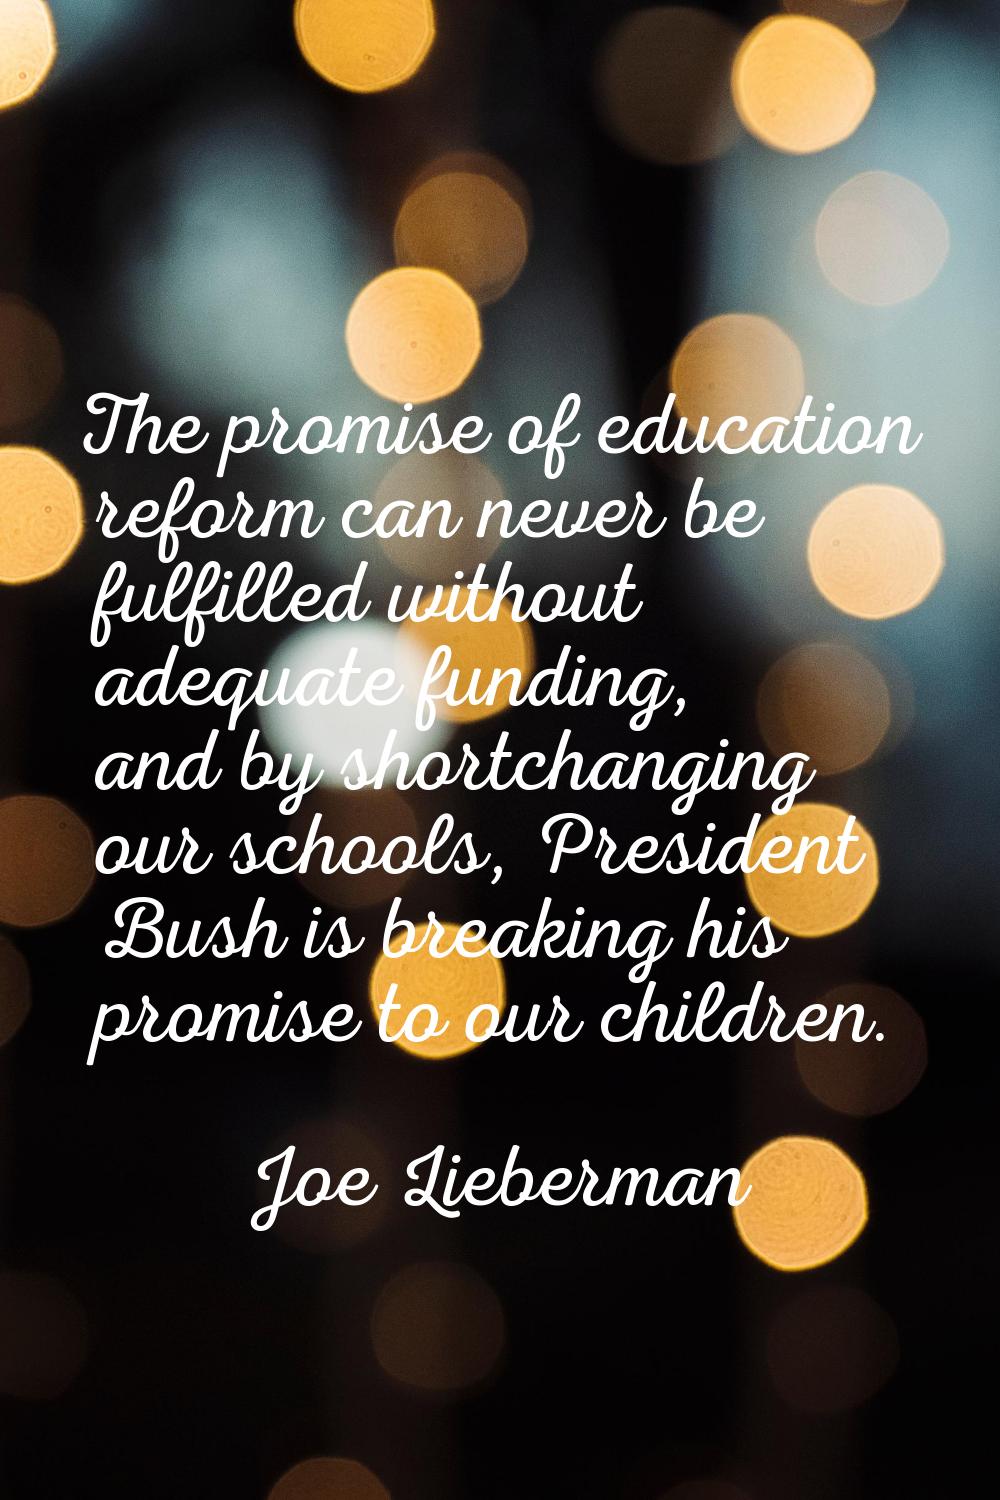 The promise of education reform can never be fulfilled without adequate funding, and by shortchangi